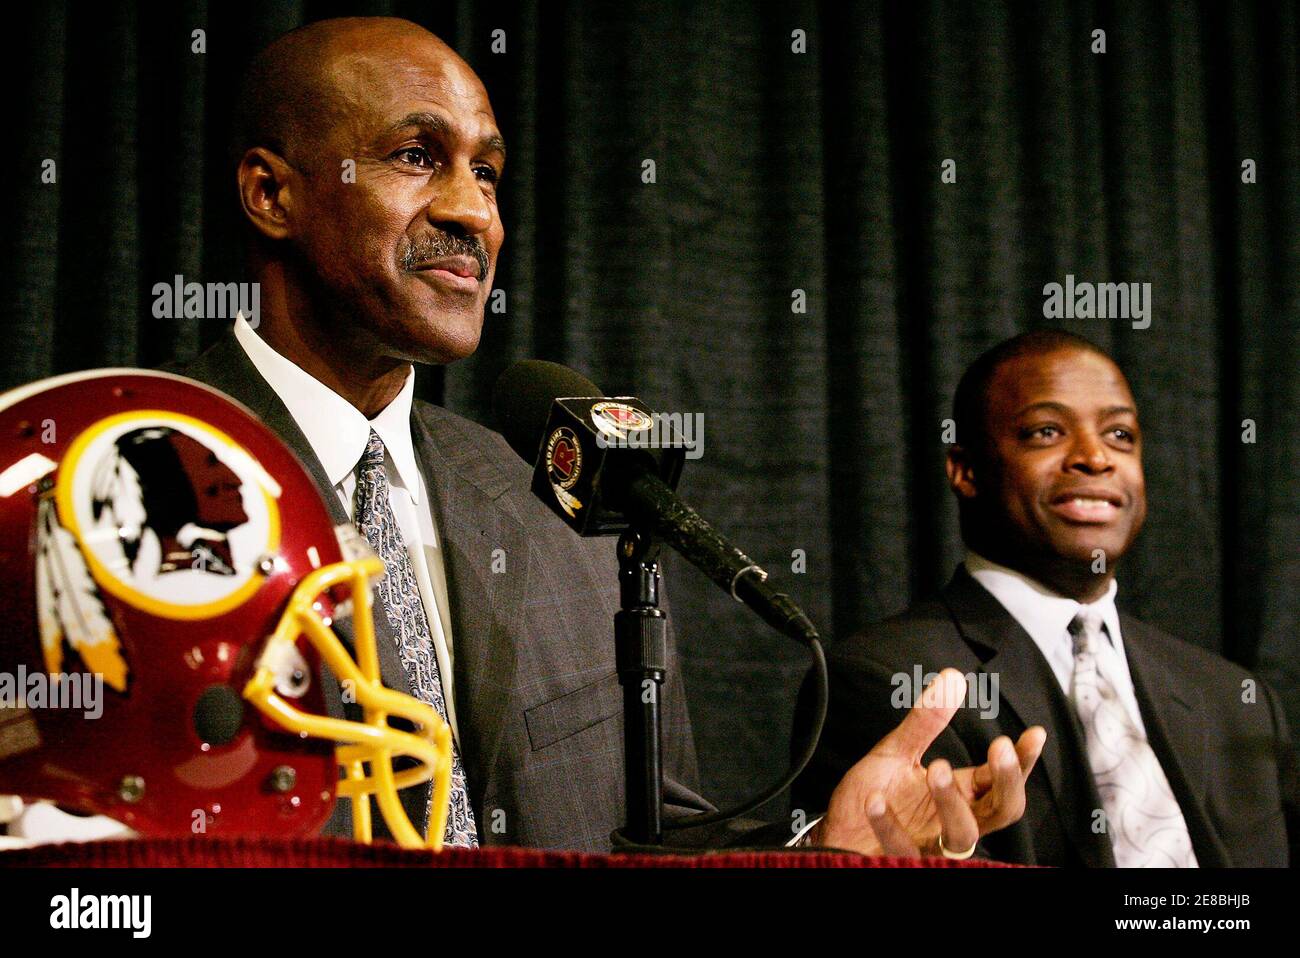 Former Washington Redskins players Darrell Green (R) and Art Monk (L) smile during a news conference at the team facility in Ashburn, Virginia on February 5, 2008. Both players will be inducted into the NFL Pro Football Hall of Fame in Canton, Ohio on August 2, 2008.      REUTERS/Gary Cameron   (UNITED STATES) Stock Photo